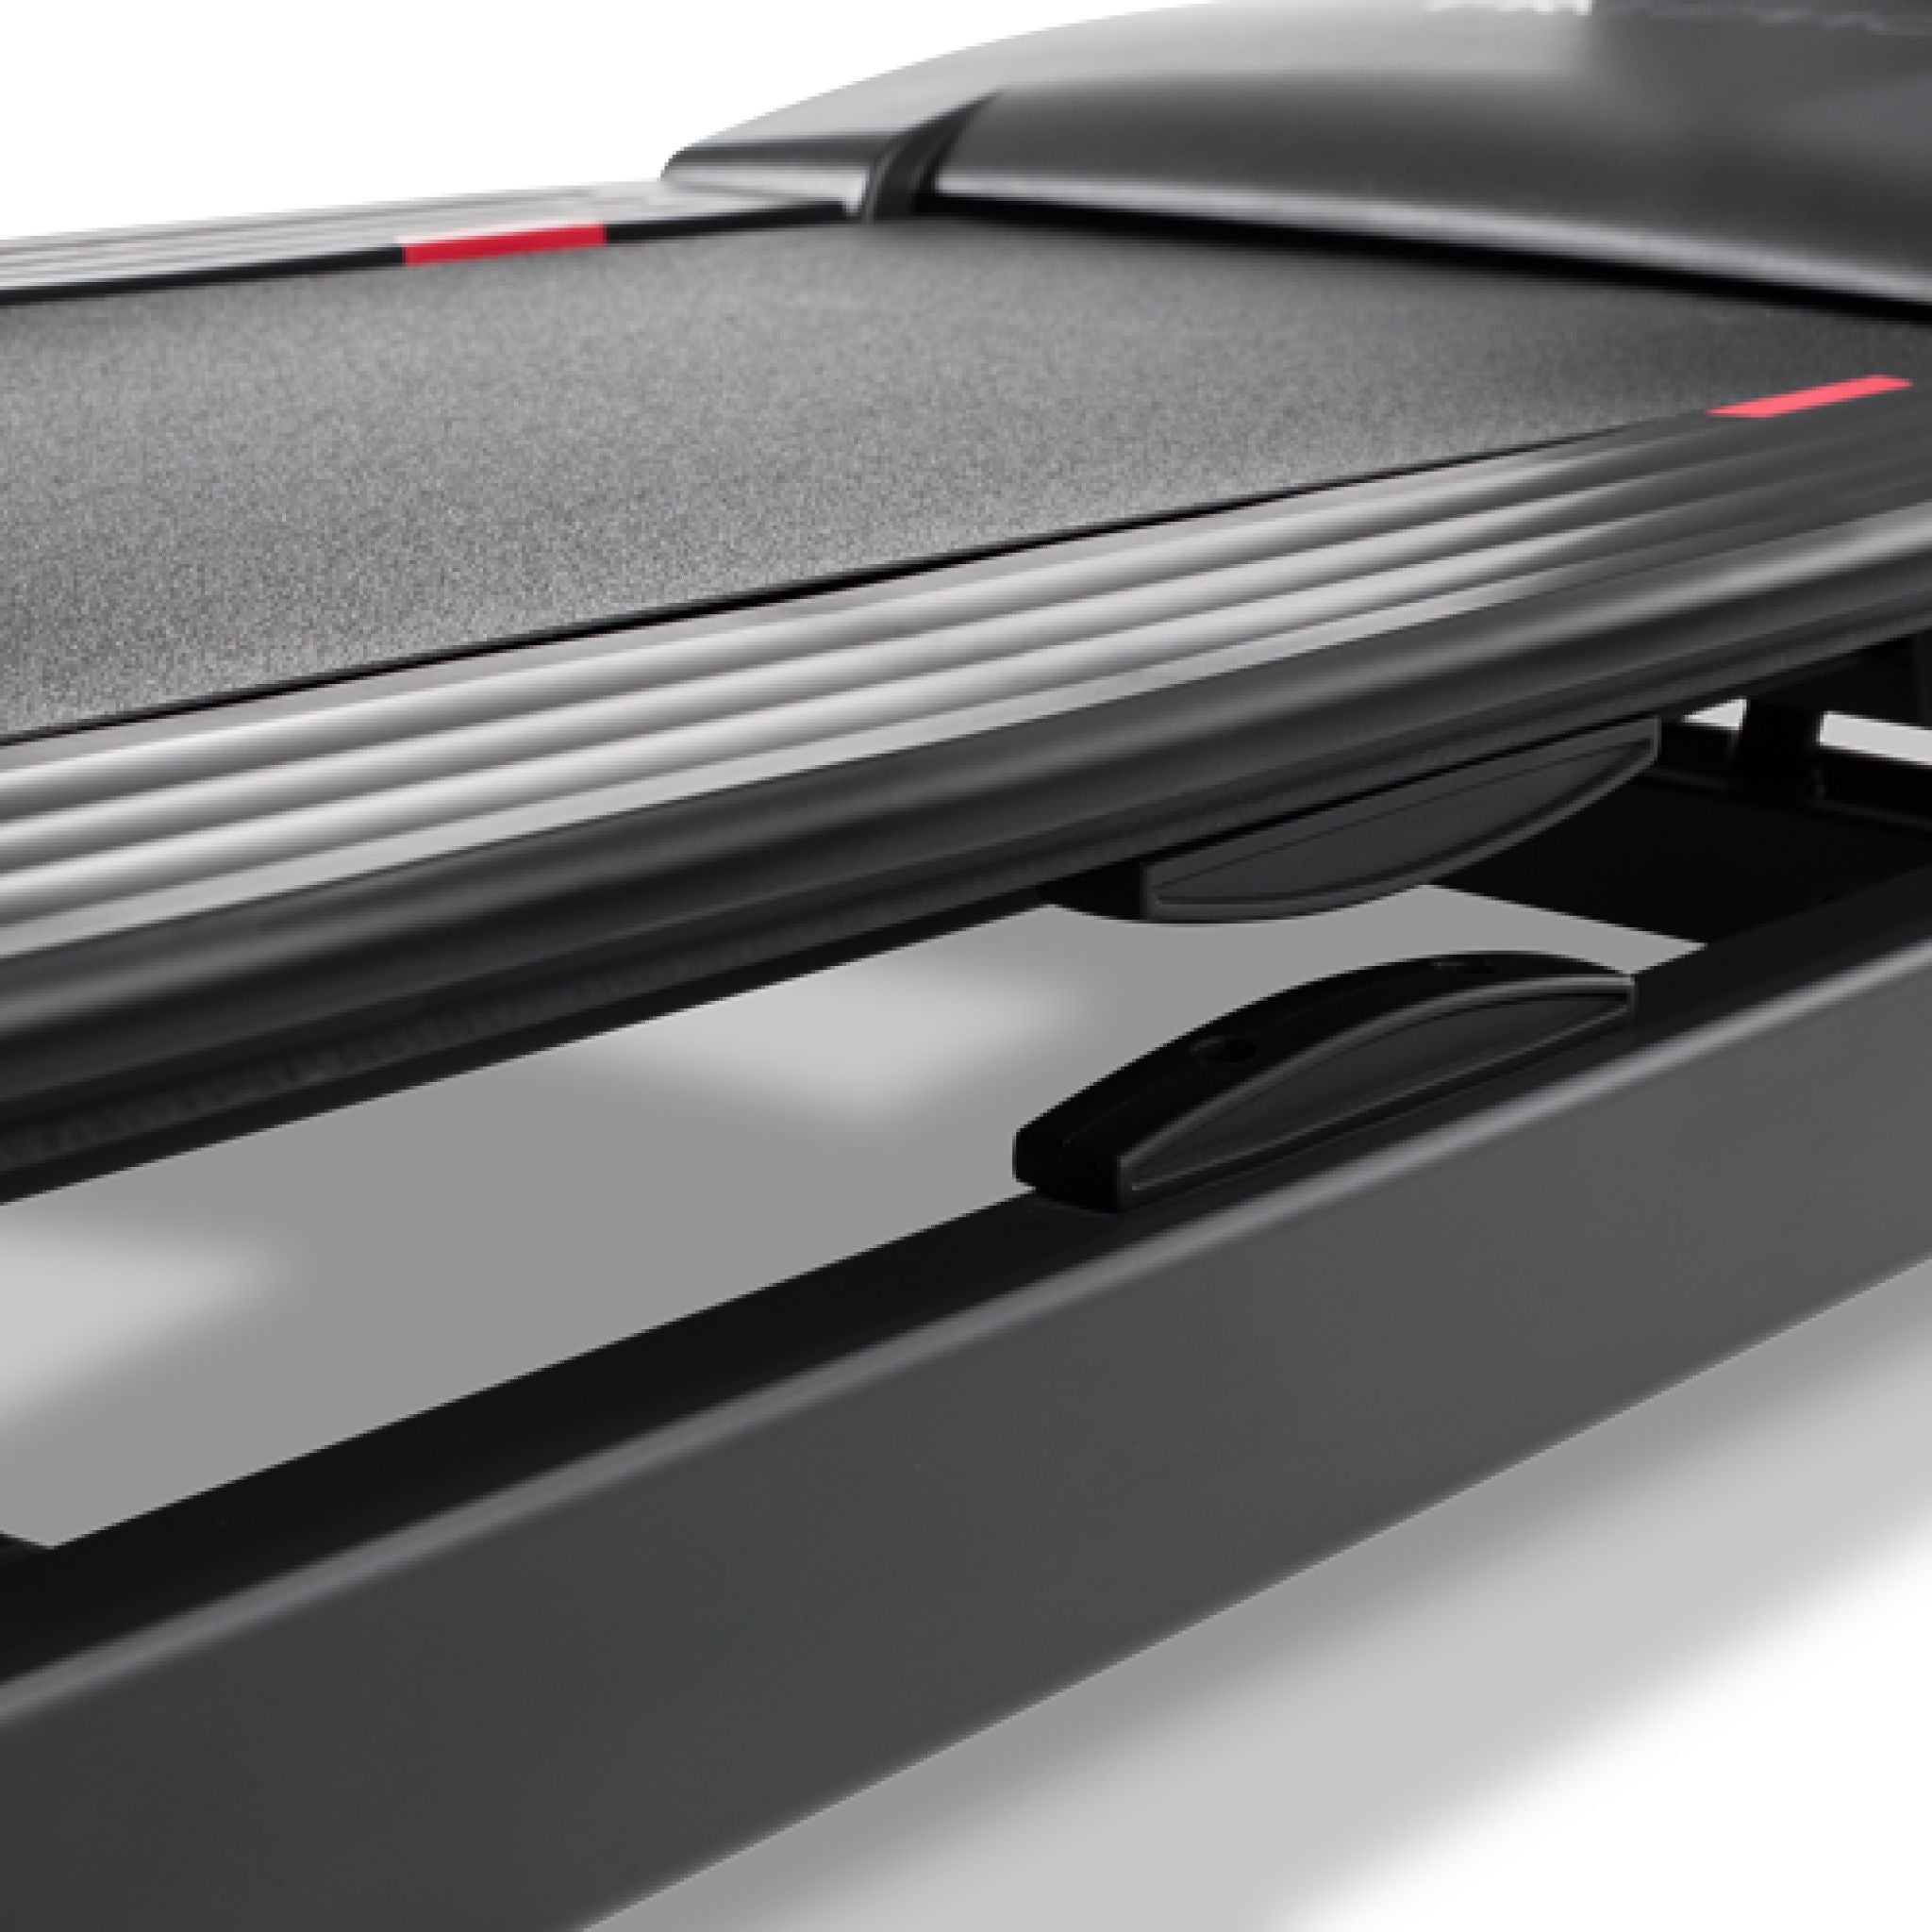 An up-close look at the deck on the Freemotion Interval Reflex 10.7 Treadmill